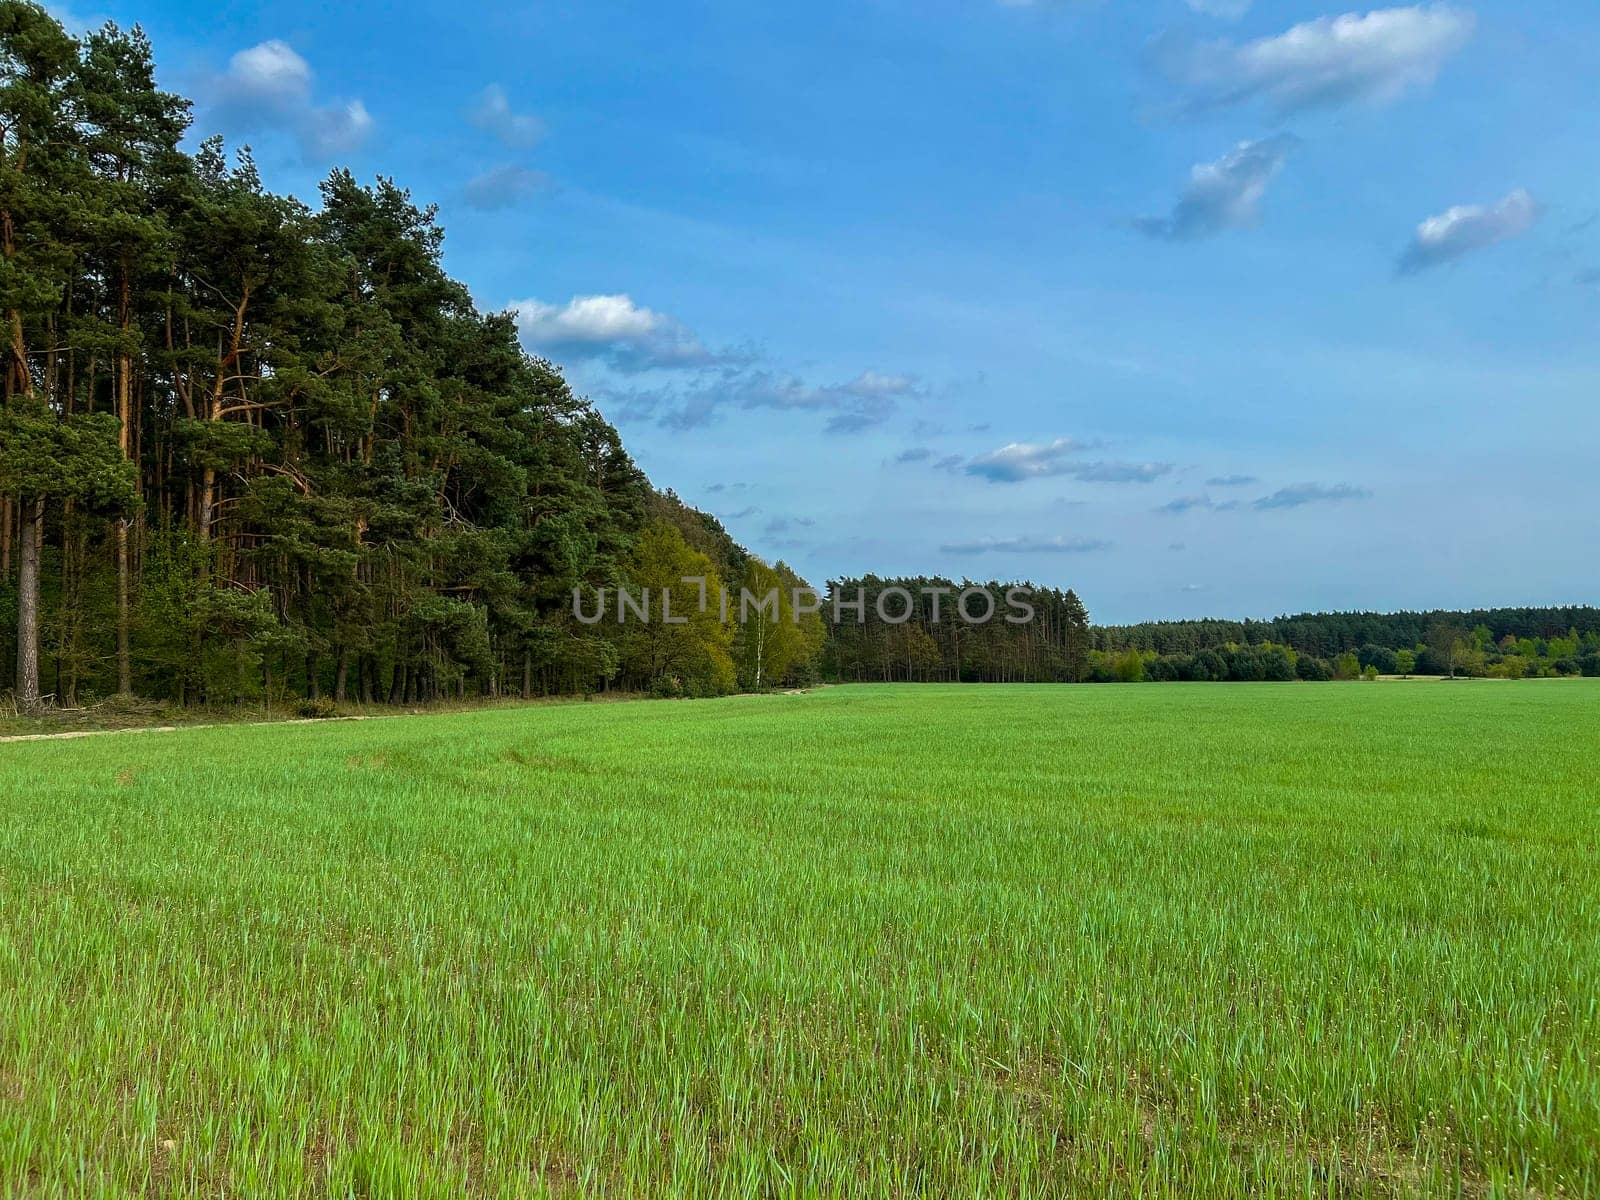 Looking over a field of maturing crops toward a colourfoul tree line under a light cloud sky. High quality photo